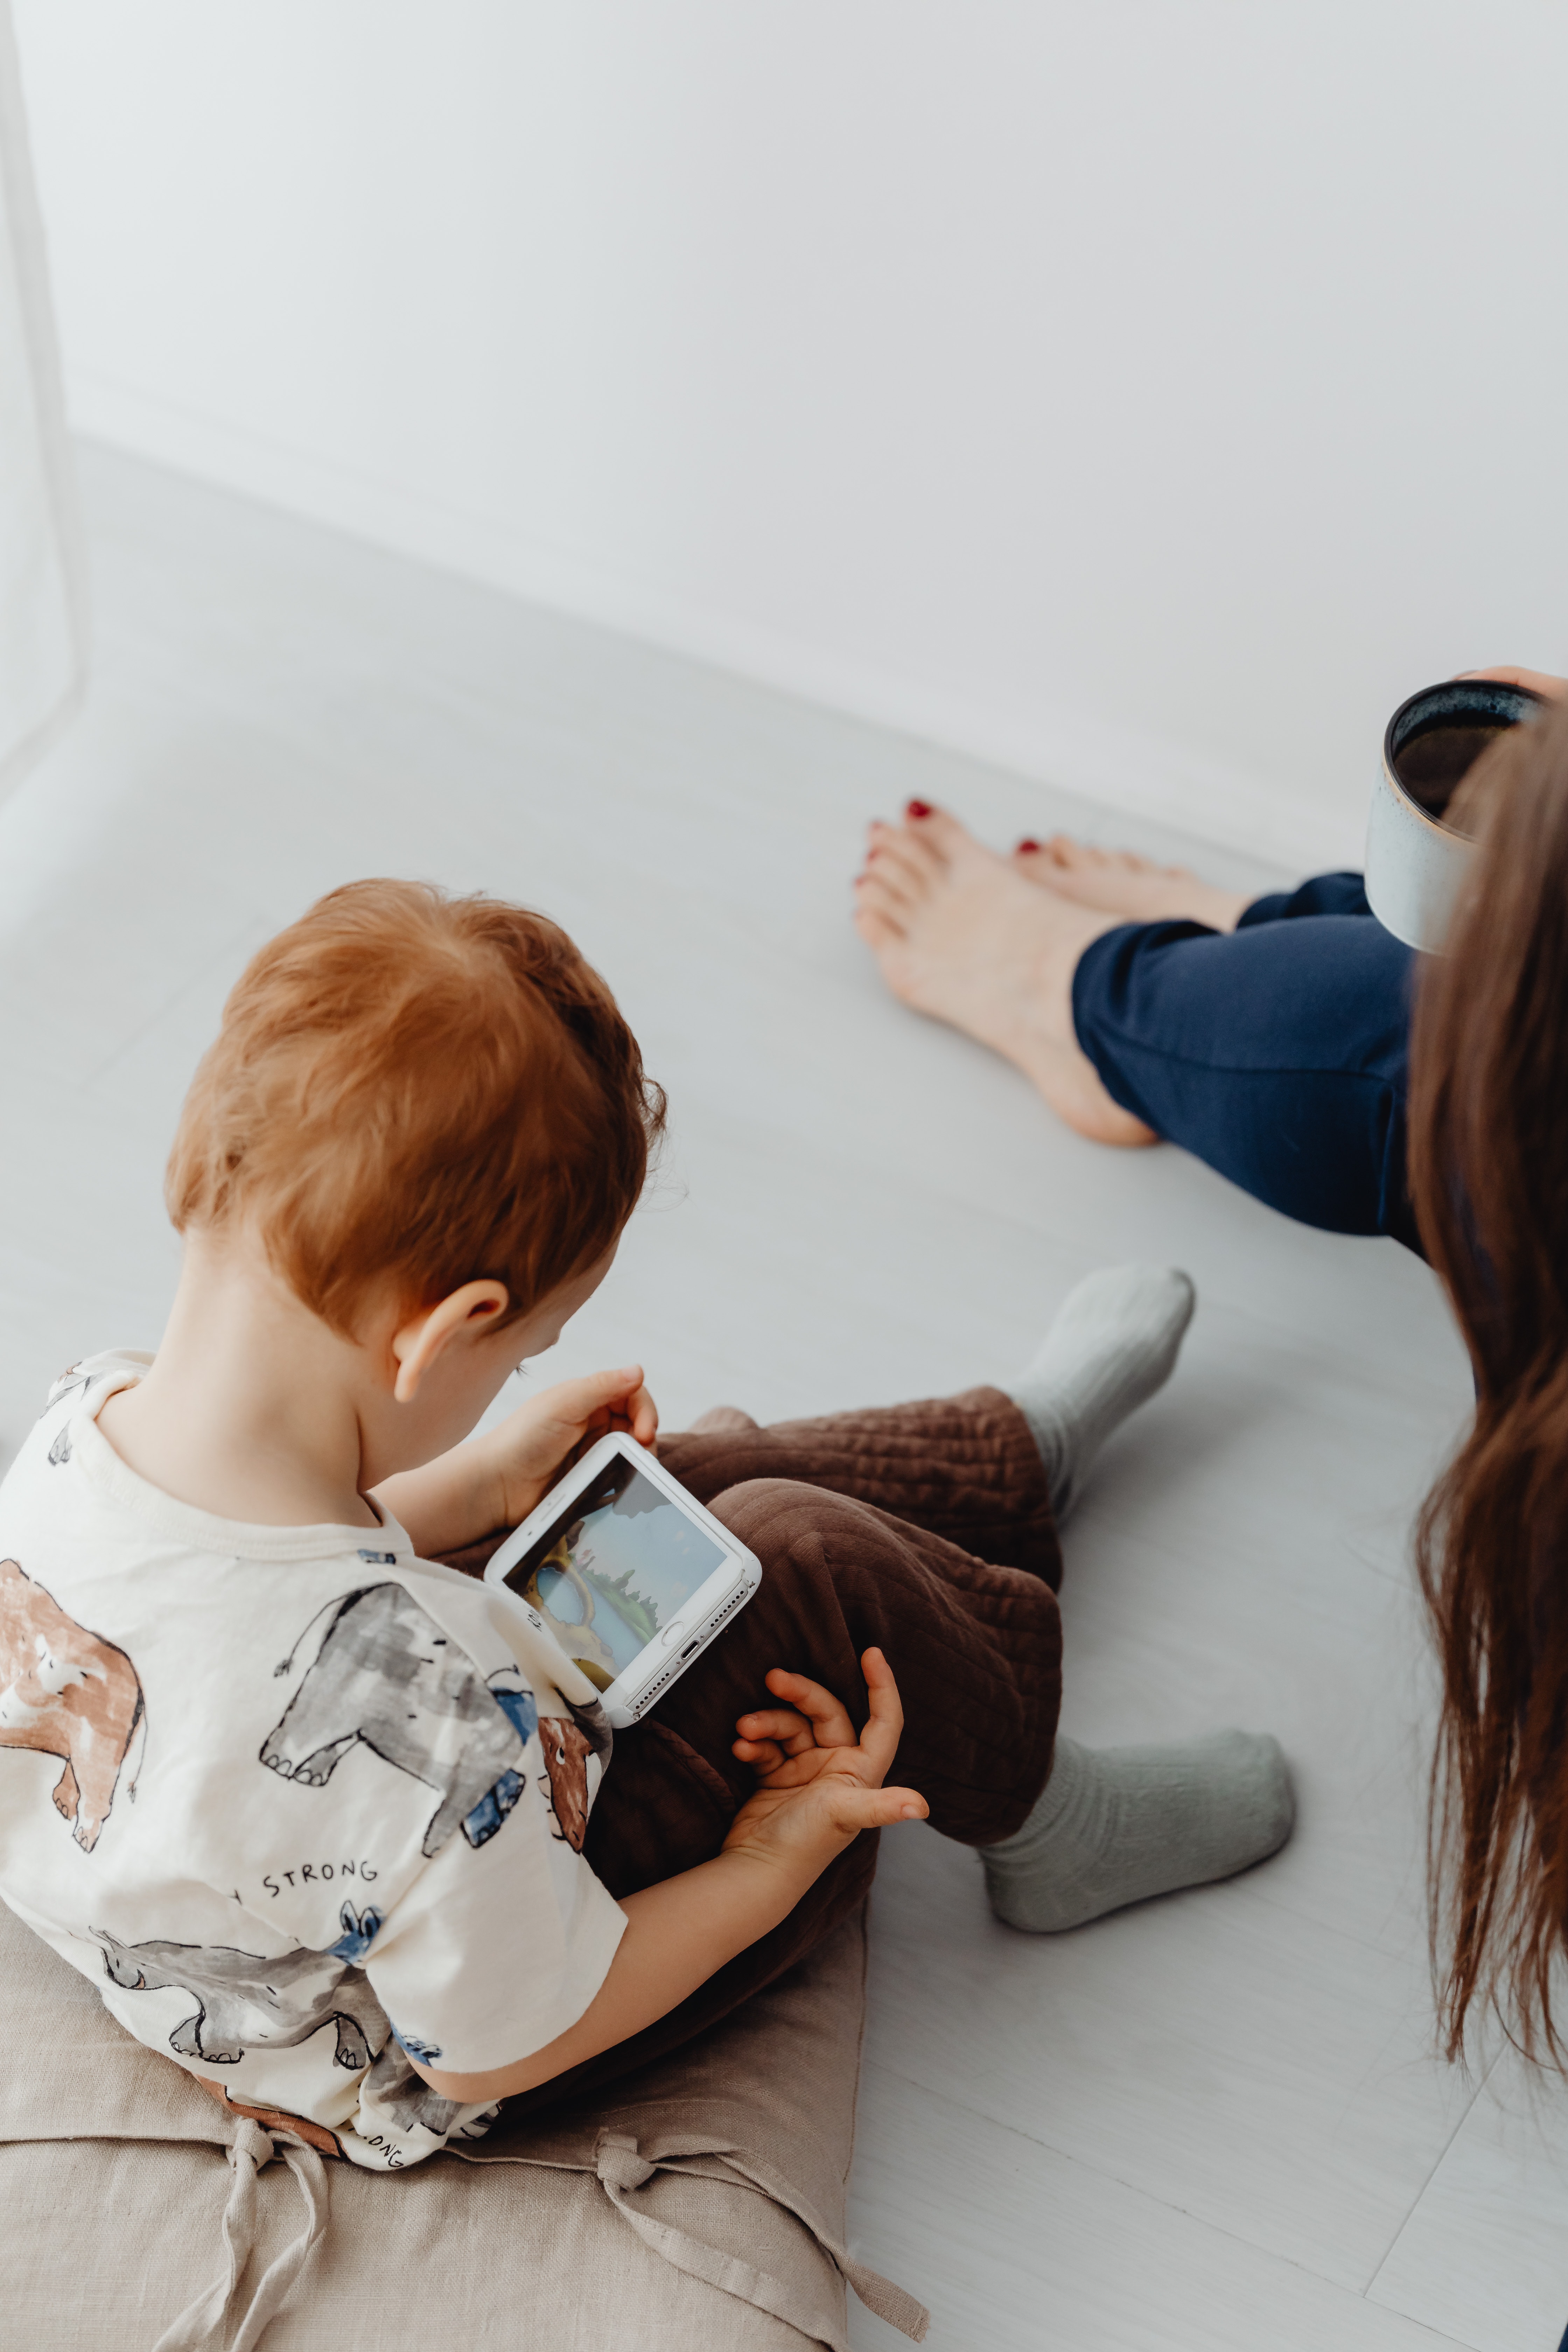 How To Keep Your Little Ones Safe on Their Devices